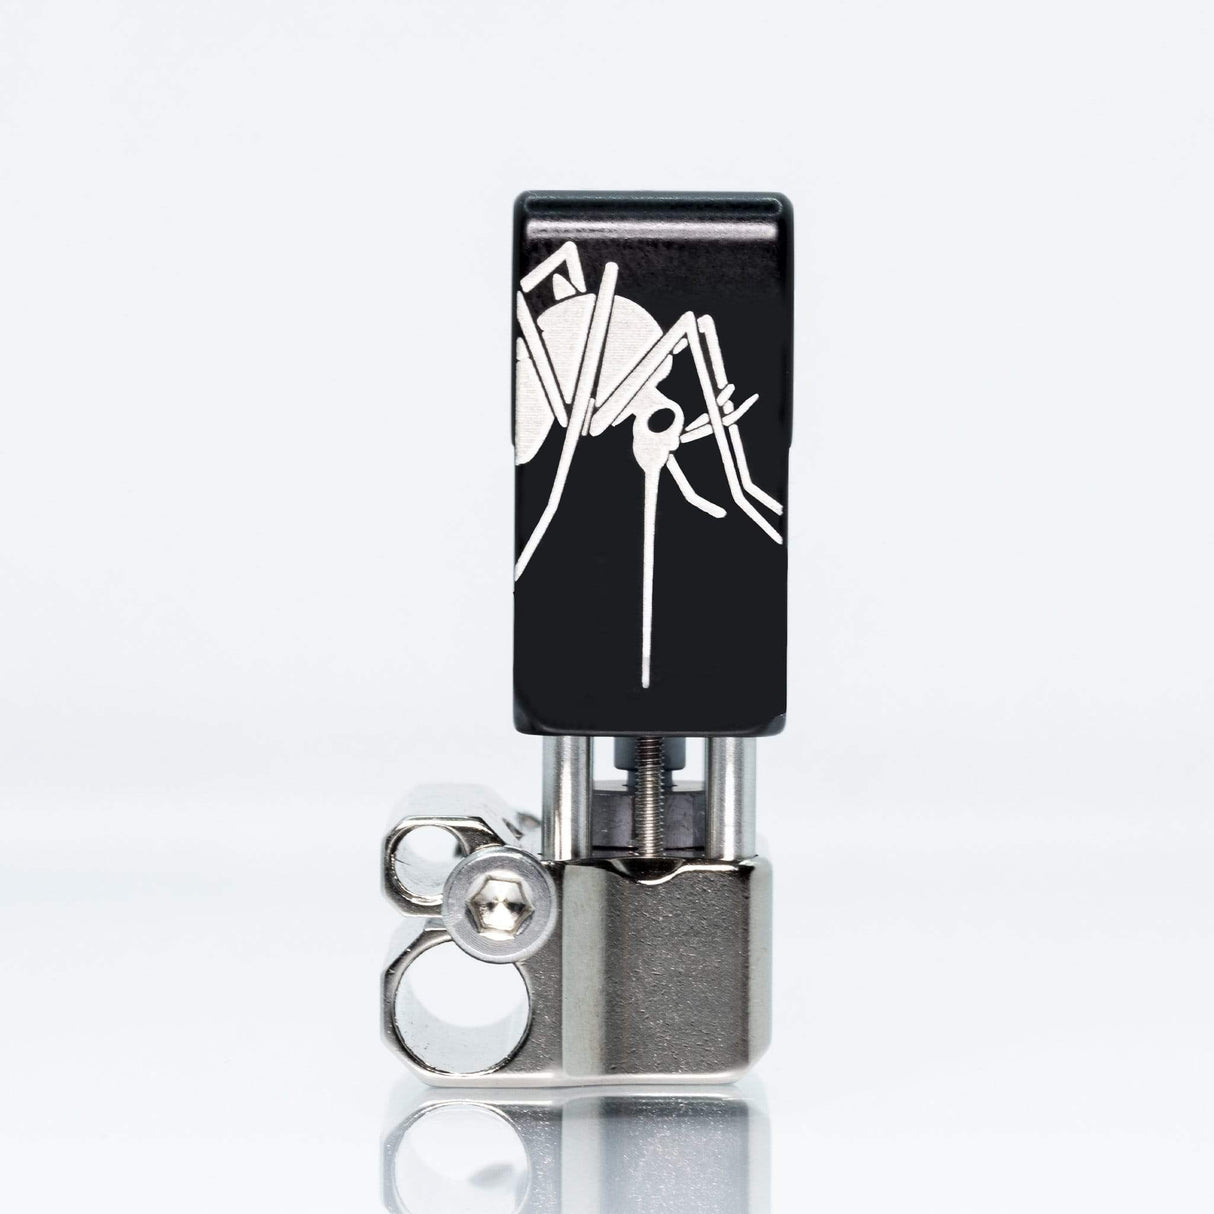 Slice Engineering Printer Parts The Mosquito® Hotend